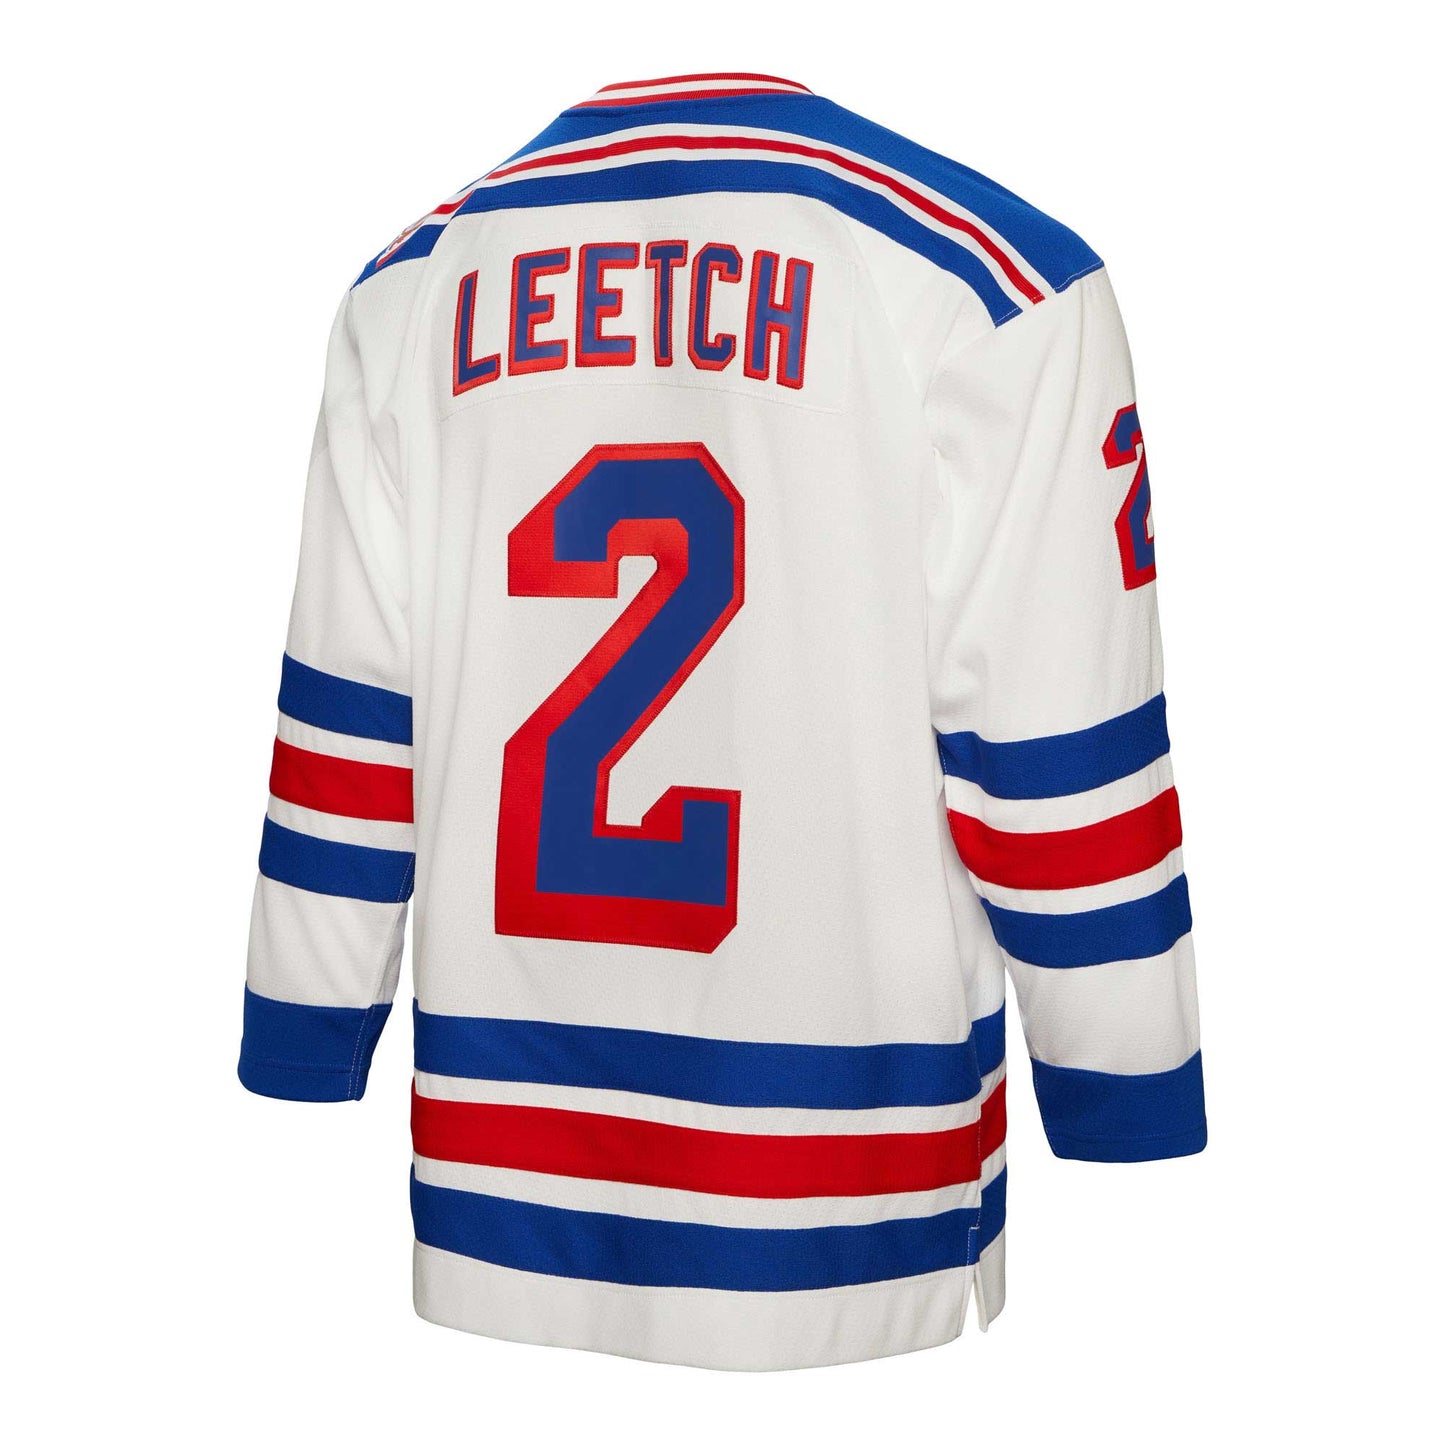 Brian Leetch New York Rangers Mitchell & Ness 1993/94 Alternate Captain Patch Blue Line Player Jersey - White